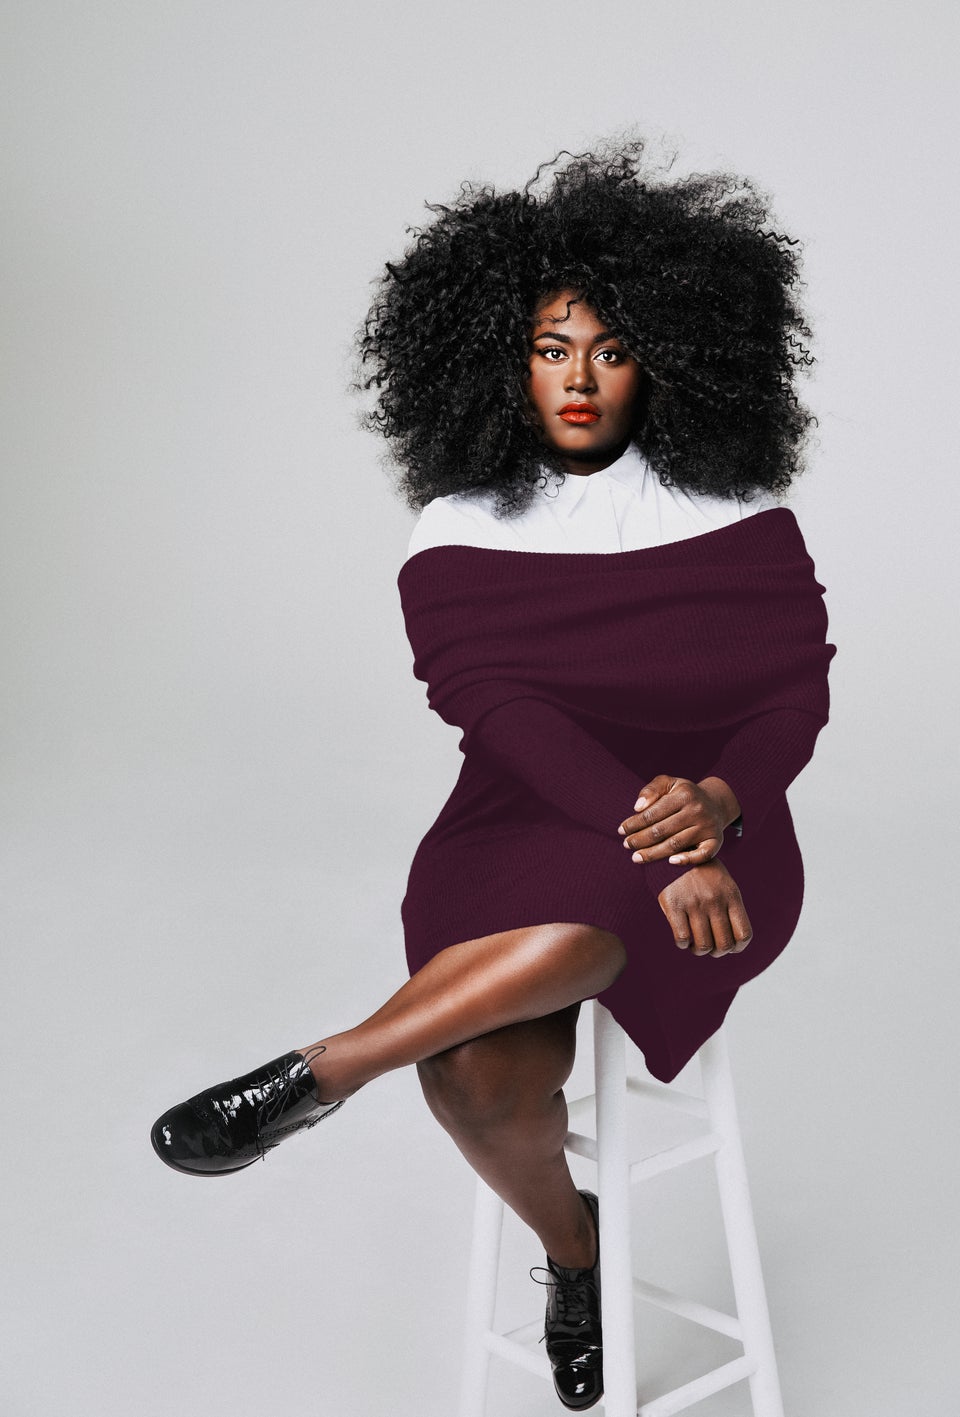 Danielle Brooks Is Designing A Fashion Line All Curvy Girls Will Love